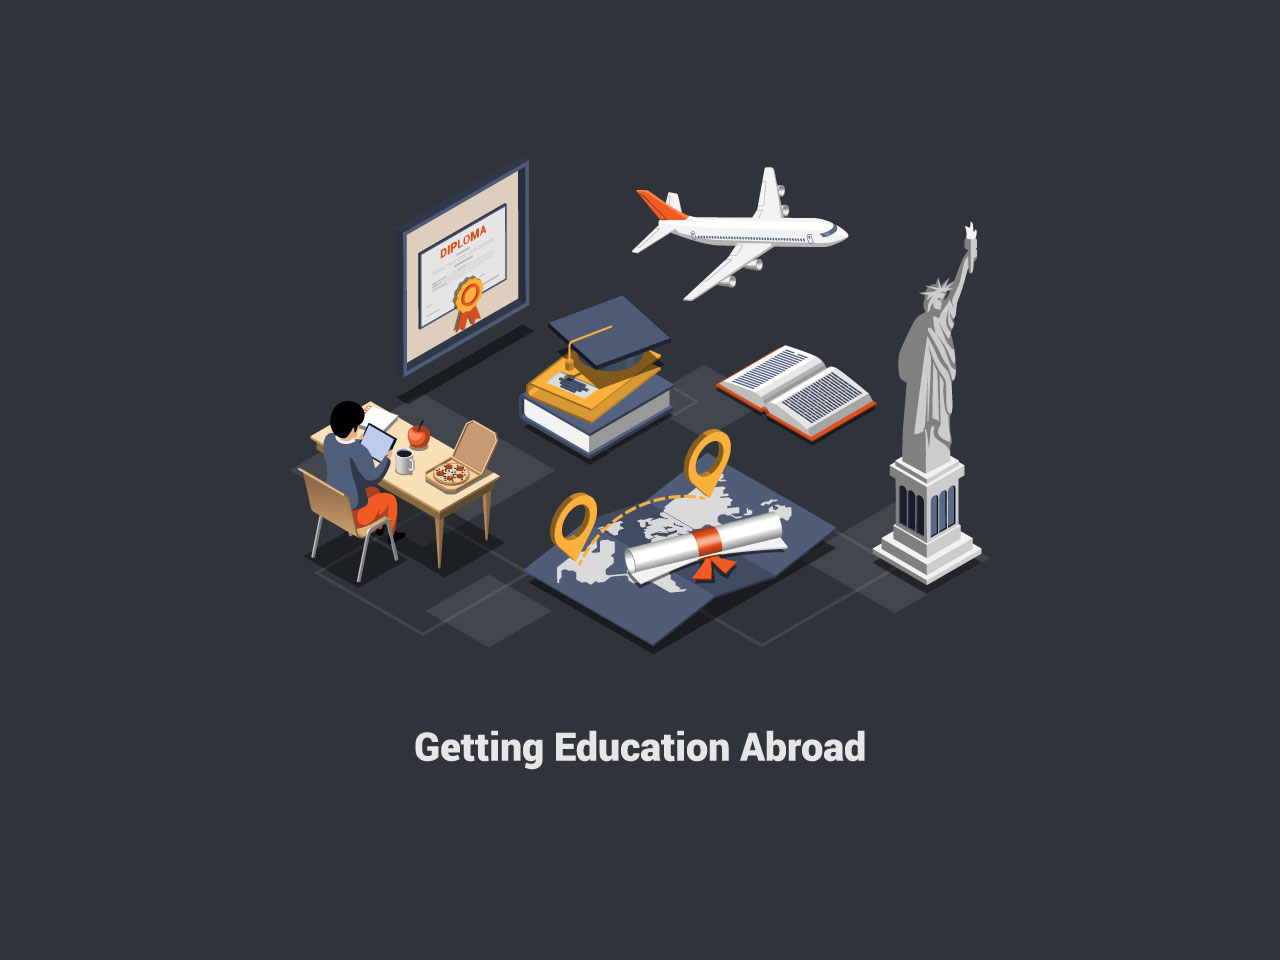 Education abroad work travel program concept exchange student take course online sitting desk with tablet hands internet education course degree isometric 3d illustration